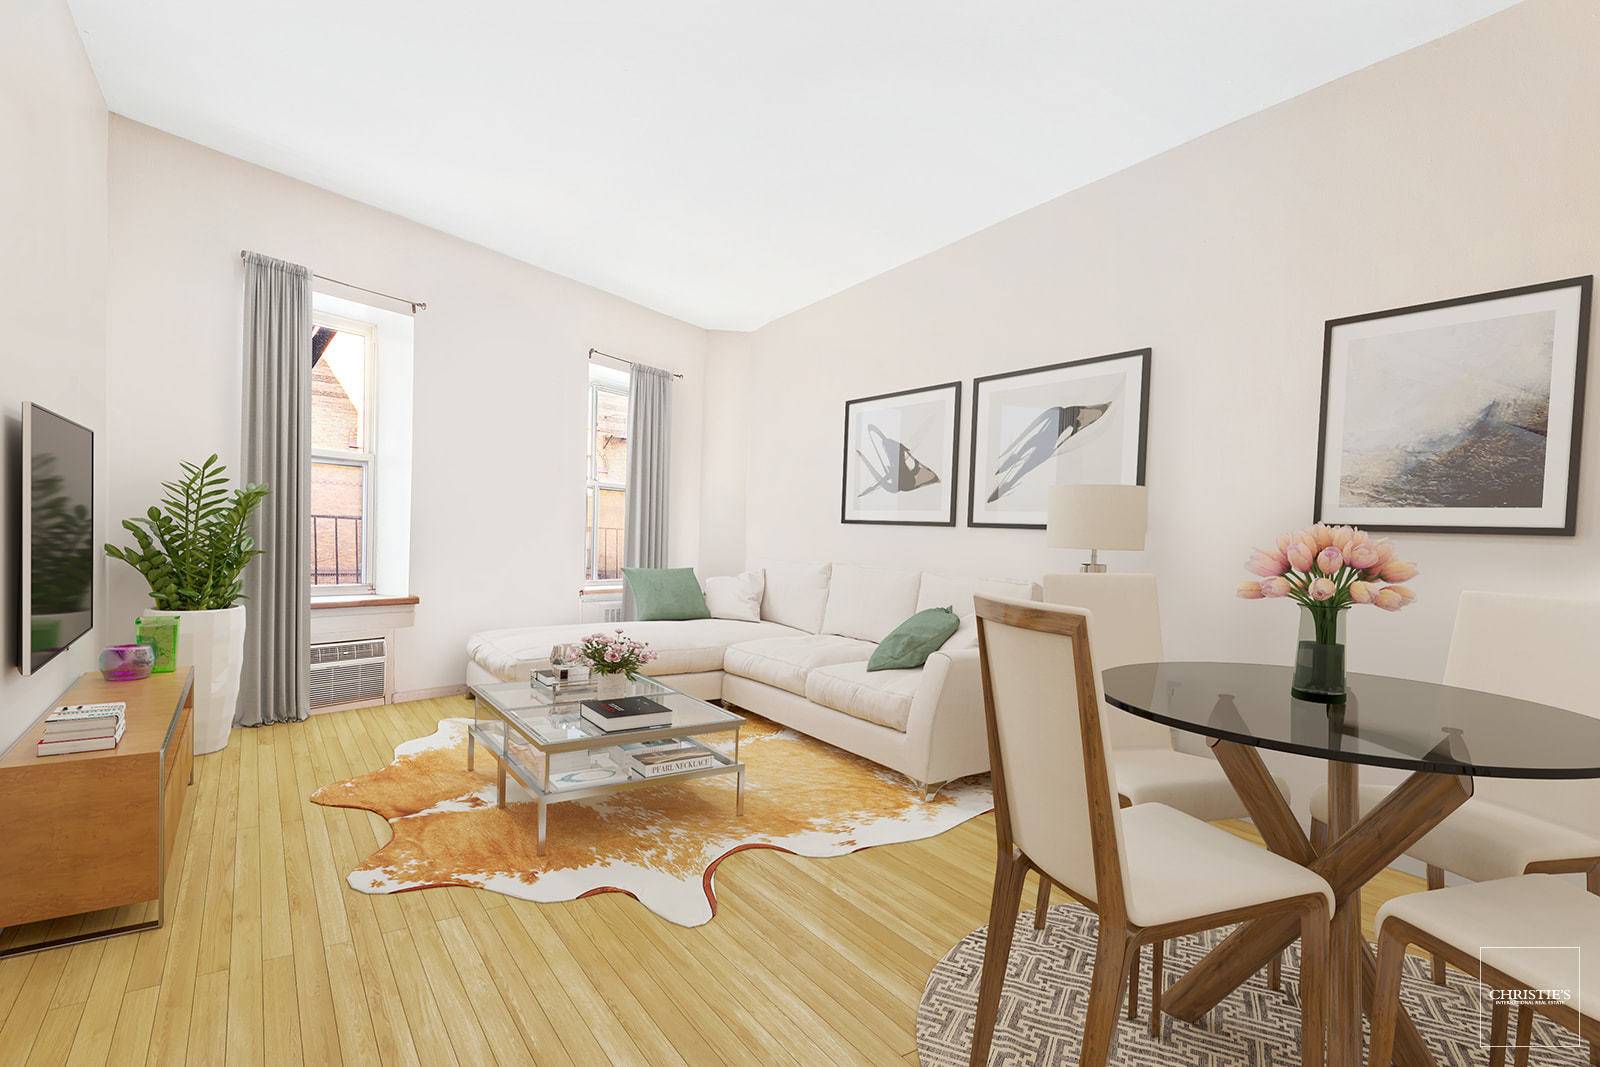 Gem on Bank Street. This over sized loft like one bedroom apartment is just minutes away from Abingdon Square Park.